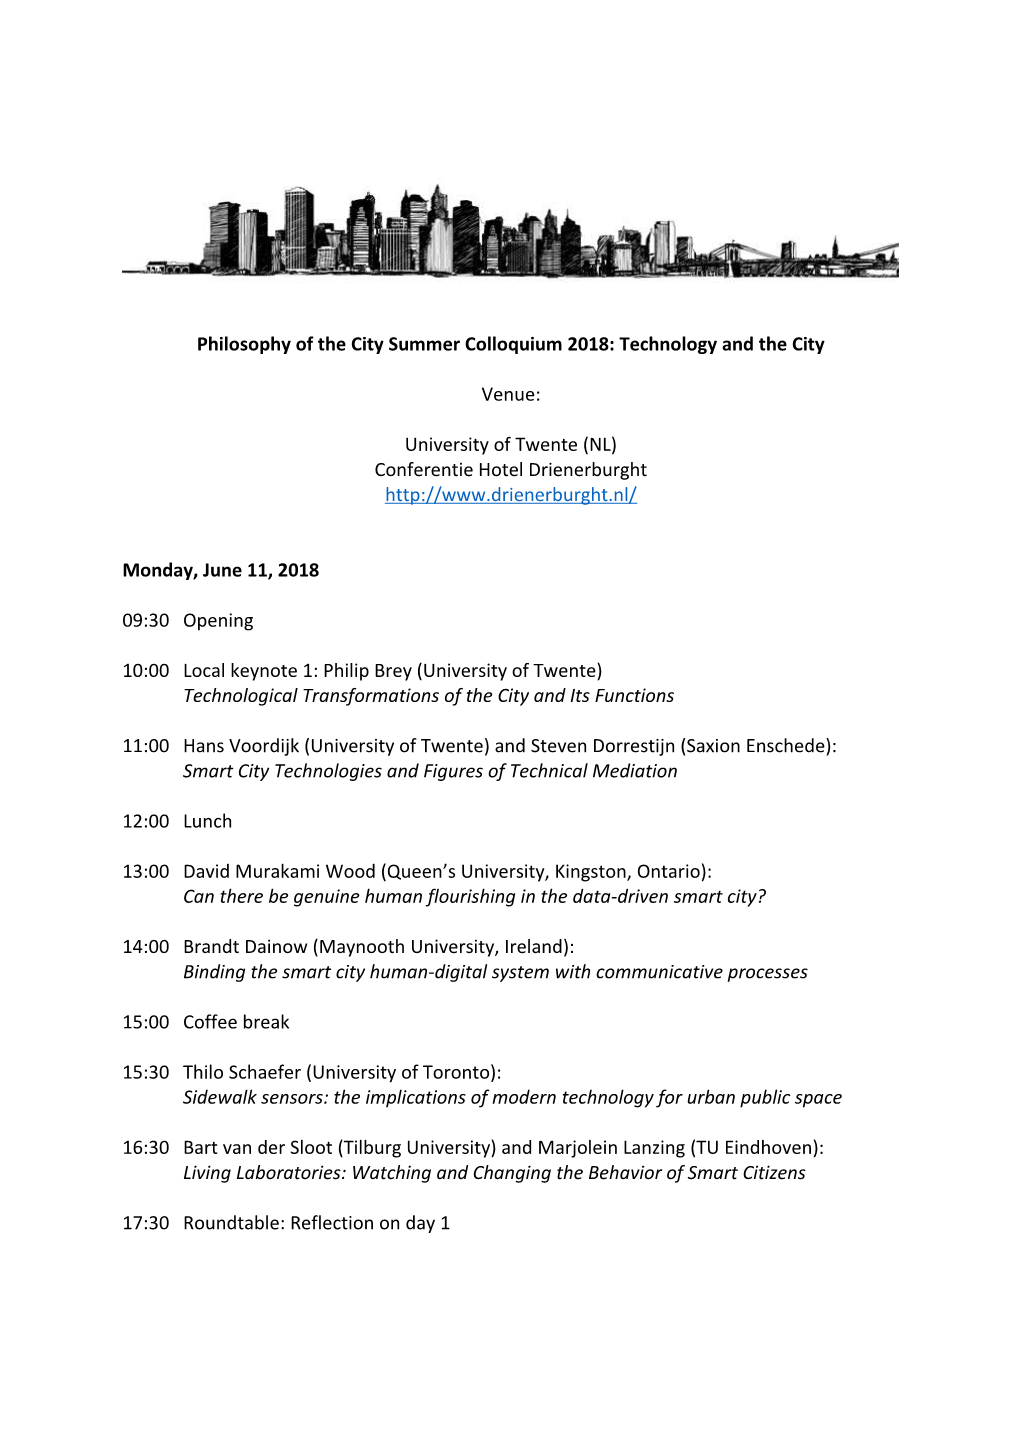 Philosophy of the City Summer Colloquium 2018: Technology and the City